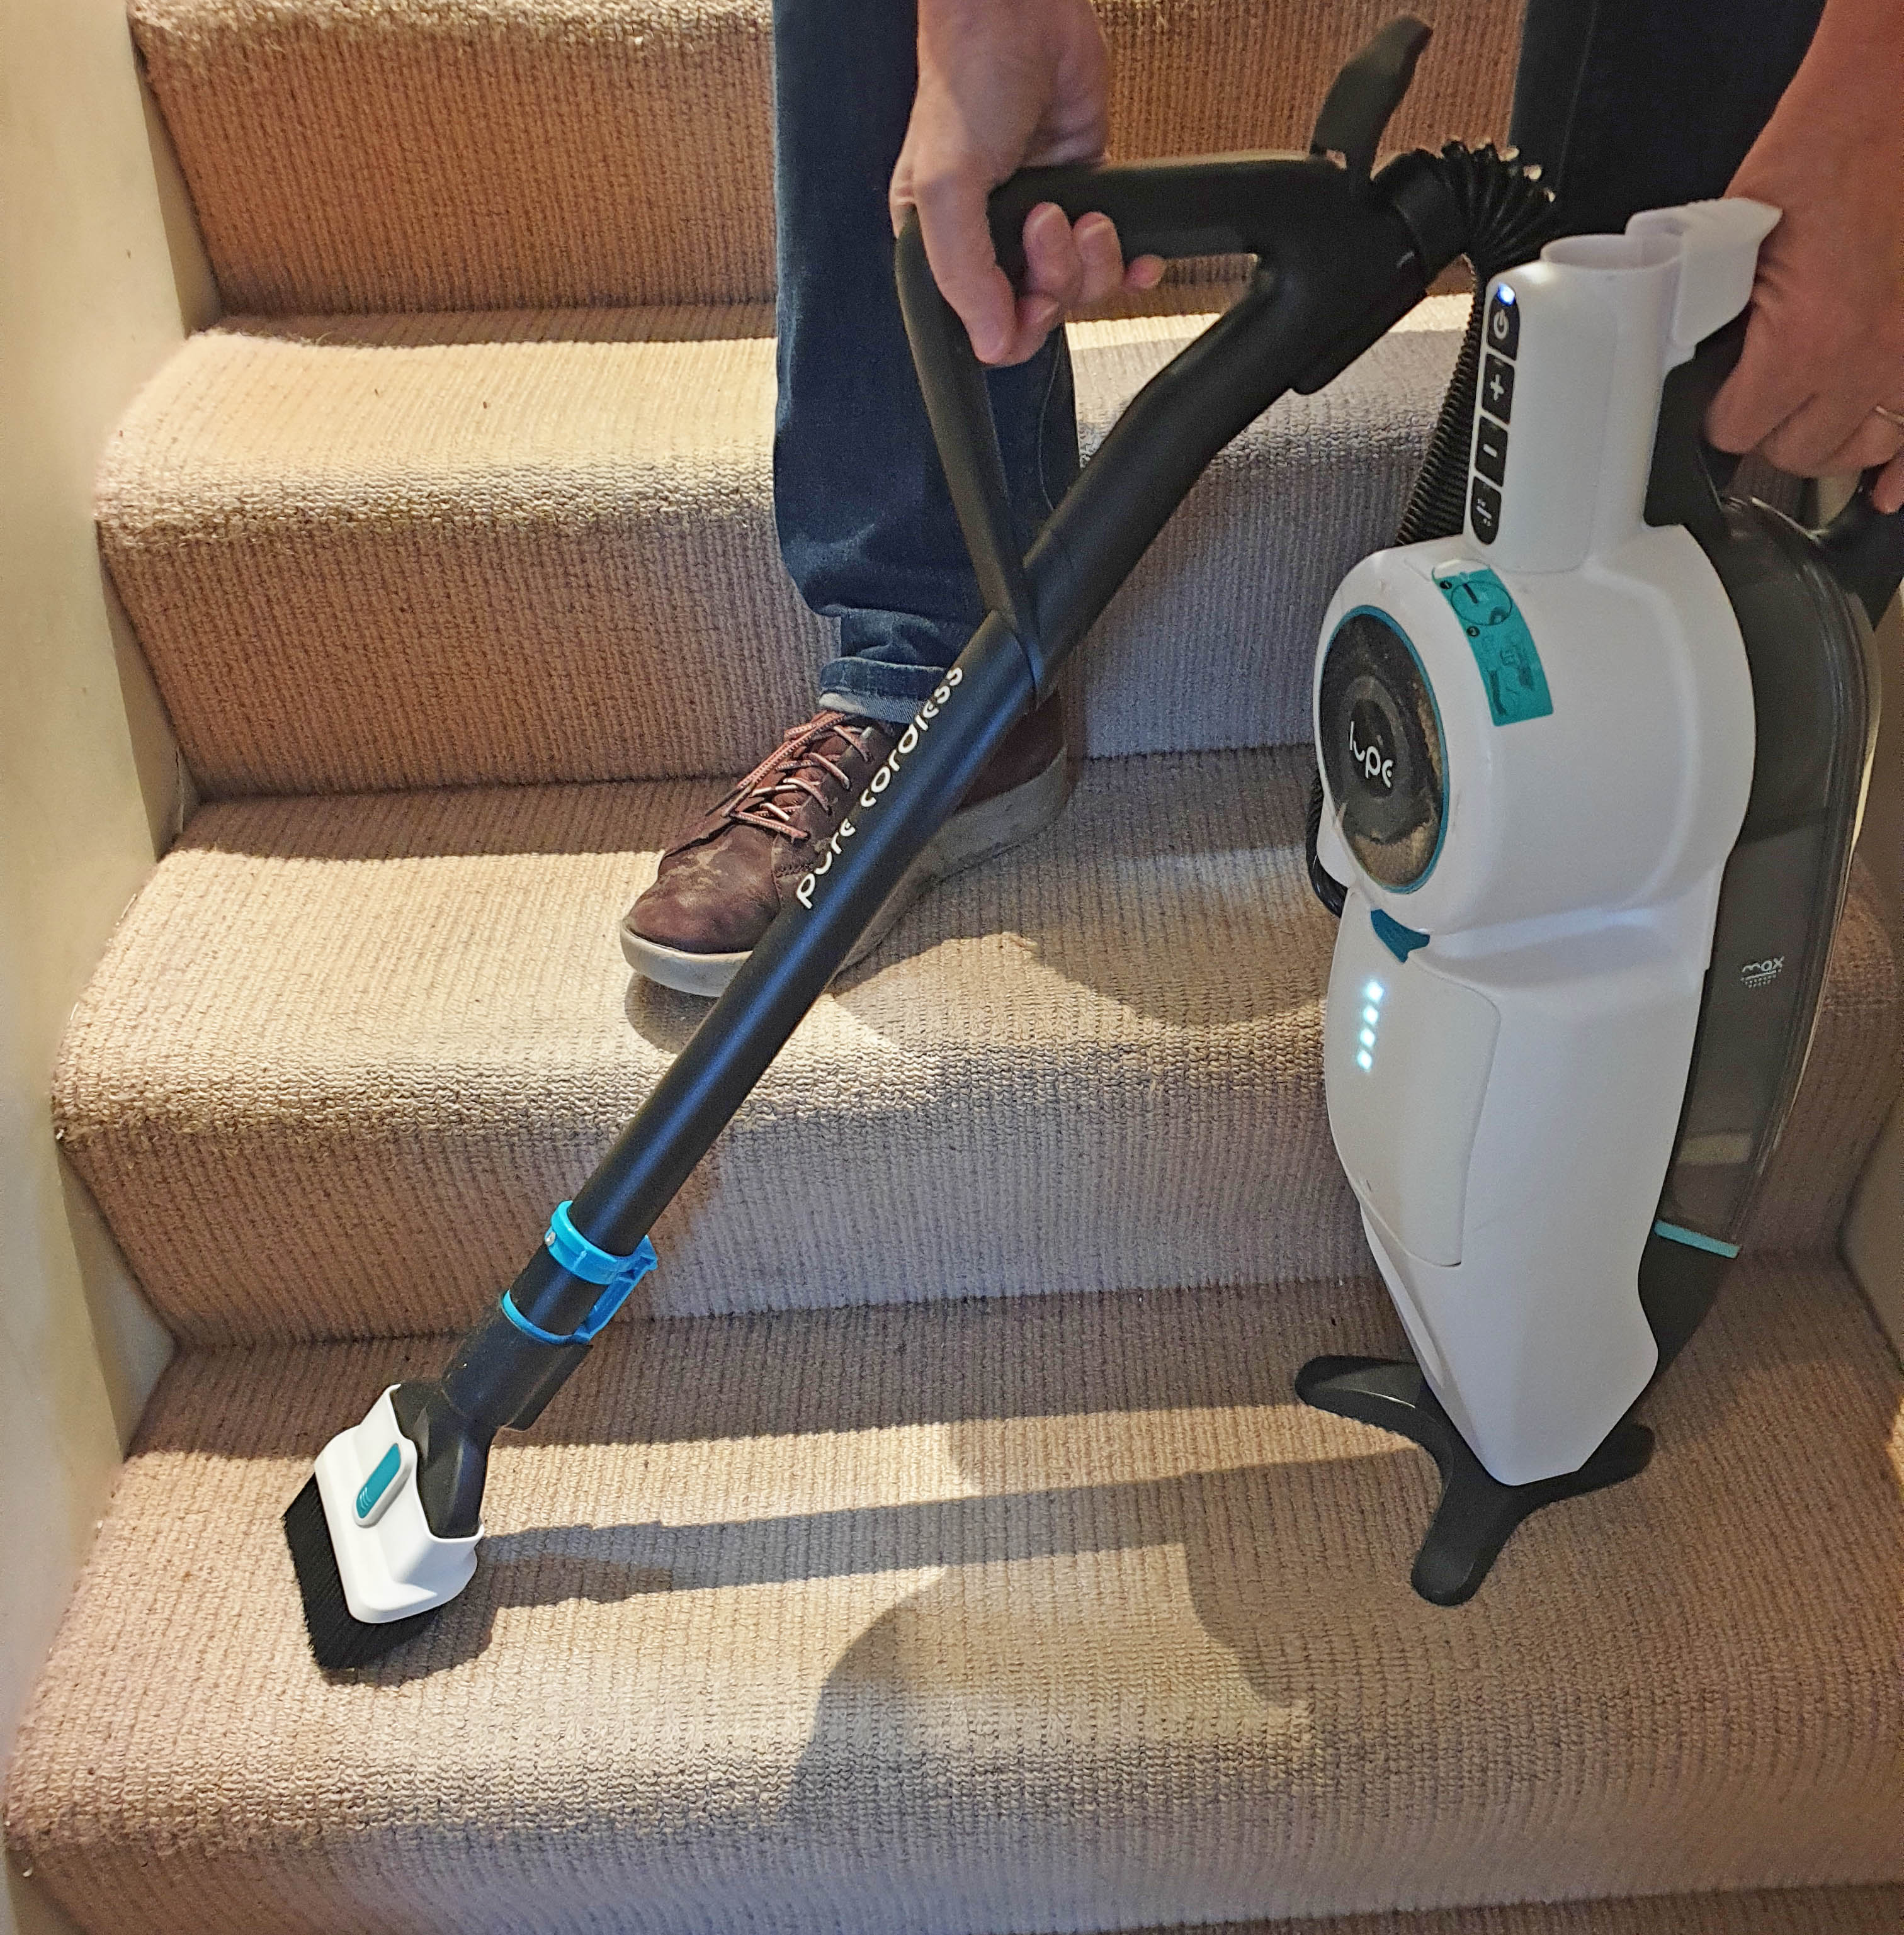 Cleaning the stairs